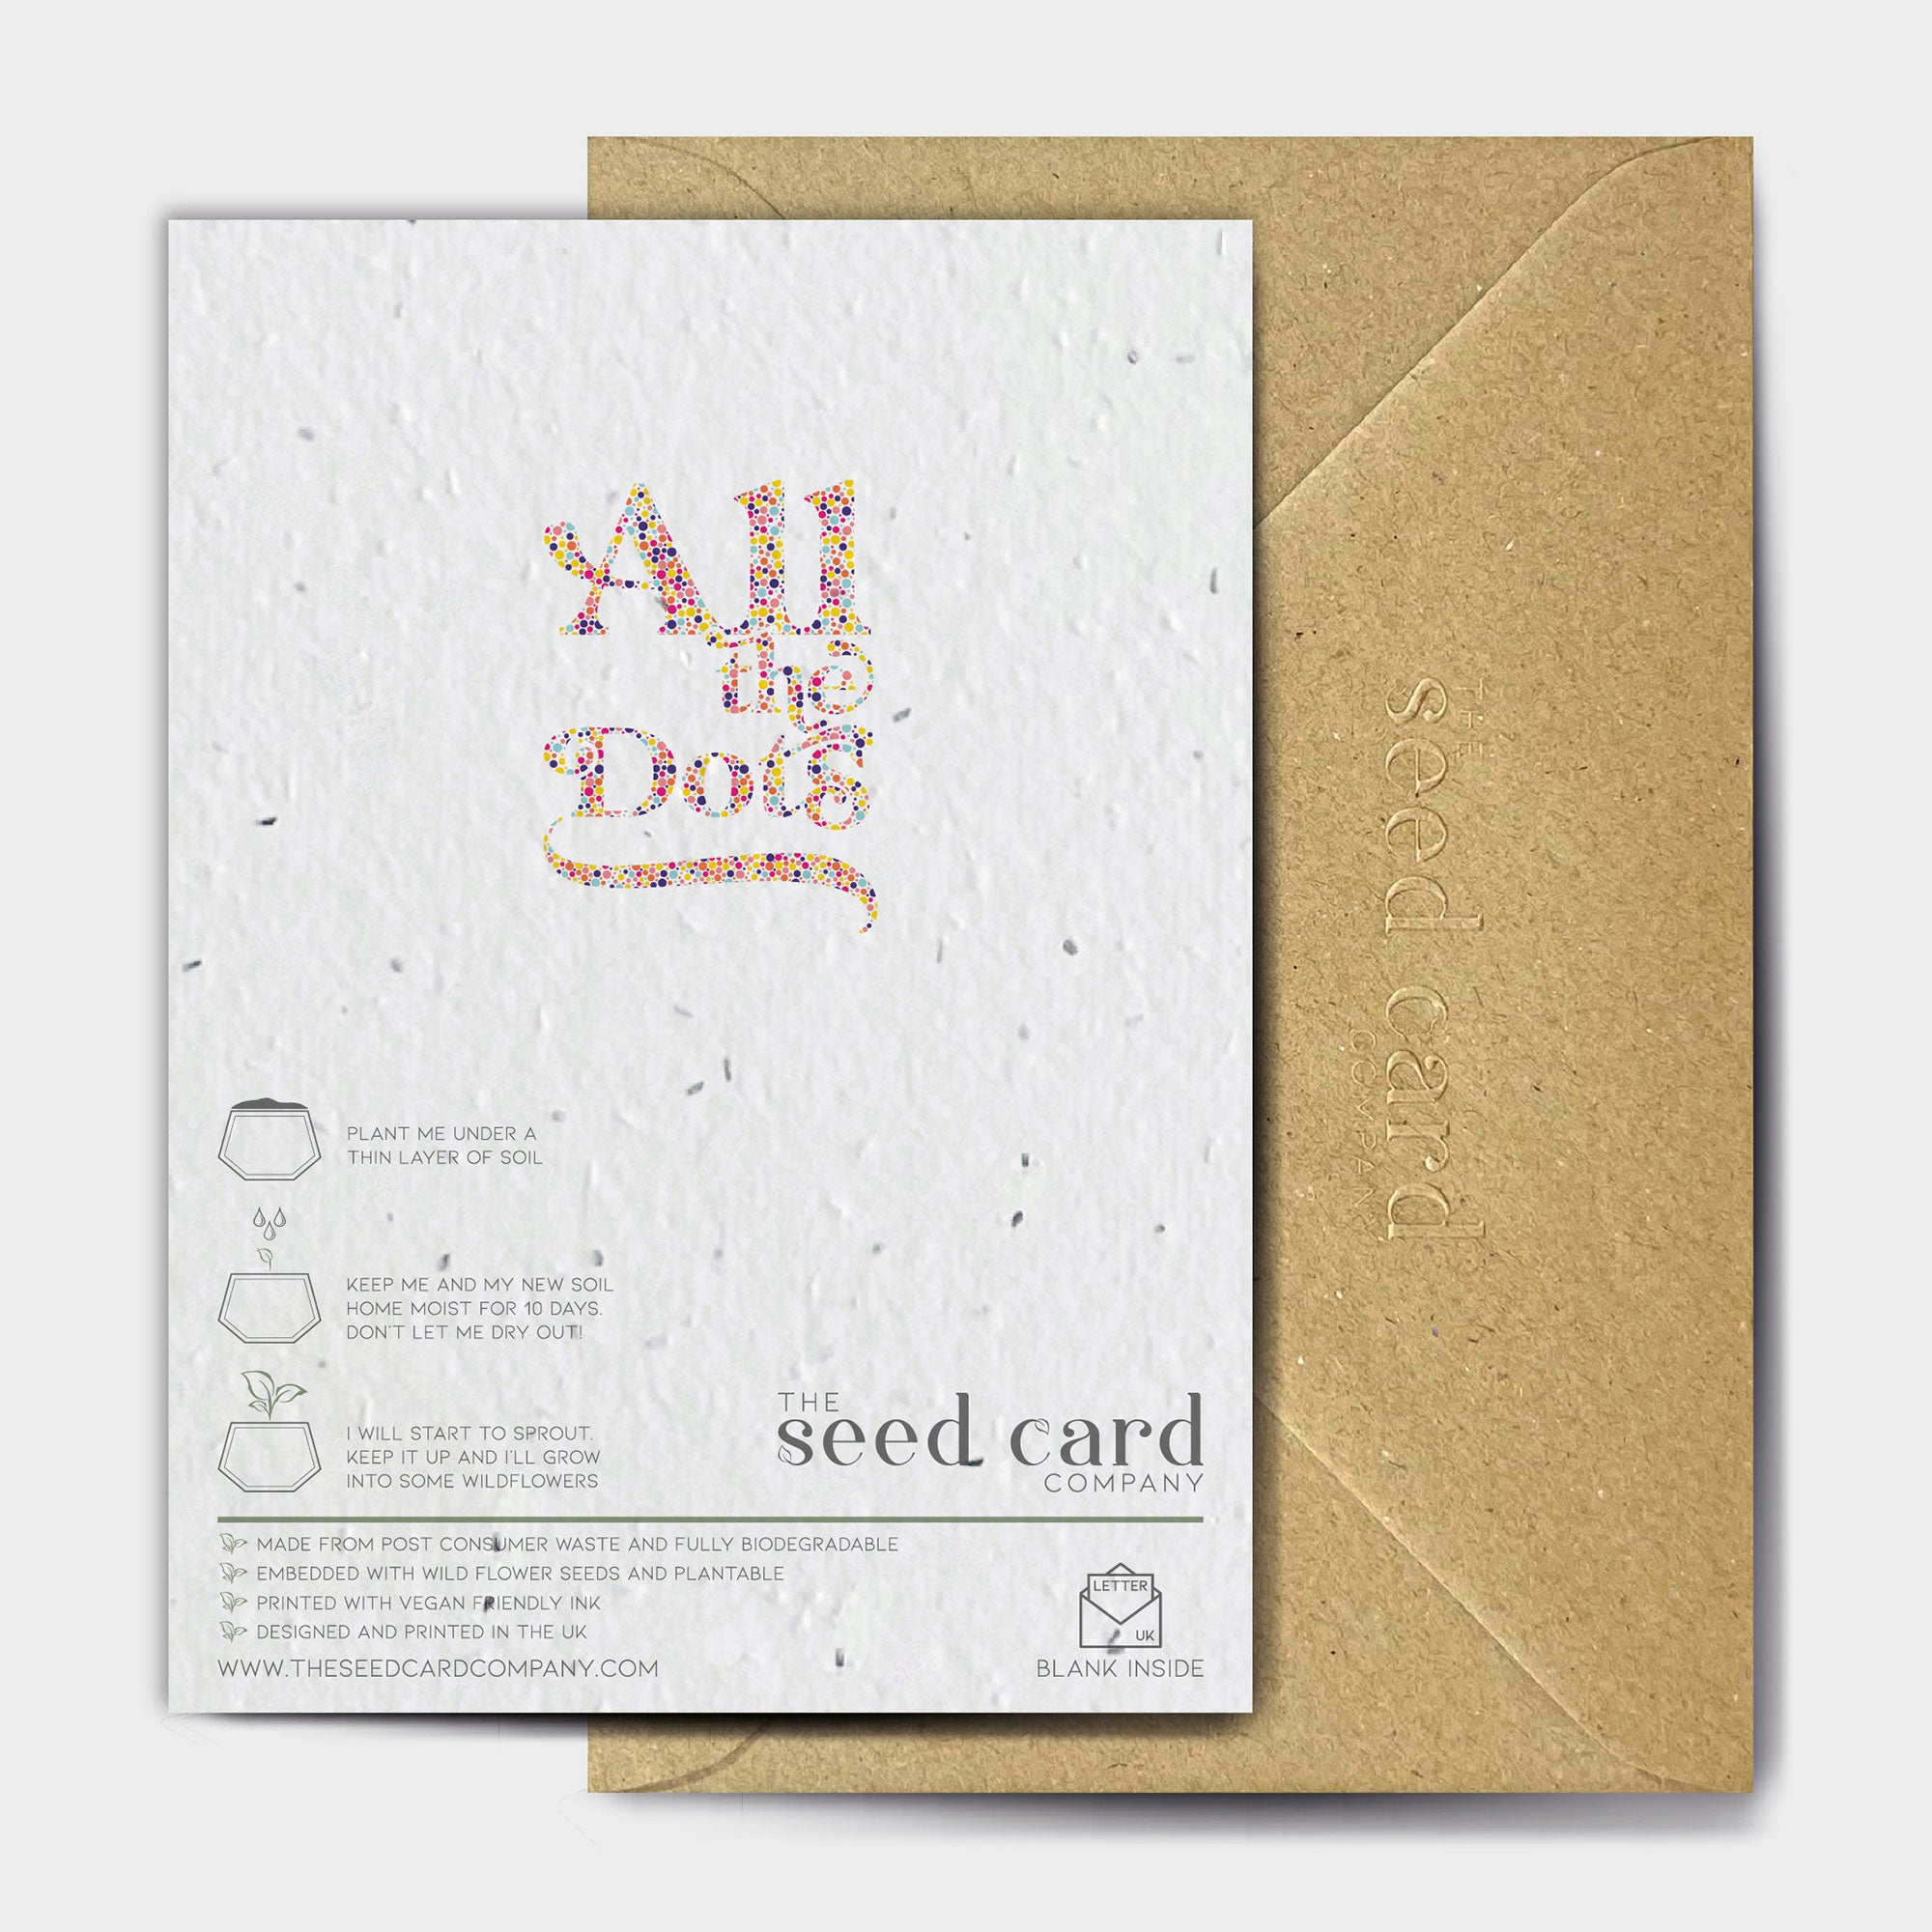 Shop online Turkey, Dots & Trimmings - 100% biodegradable seed-embedded cards Shop -The Seed Card Company